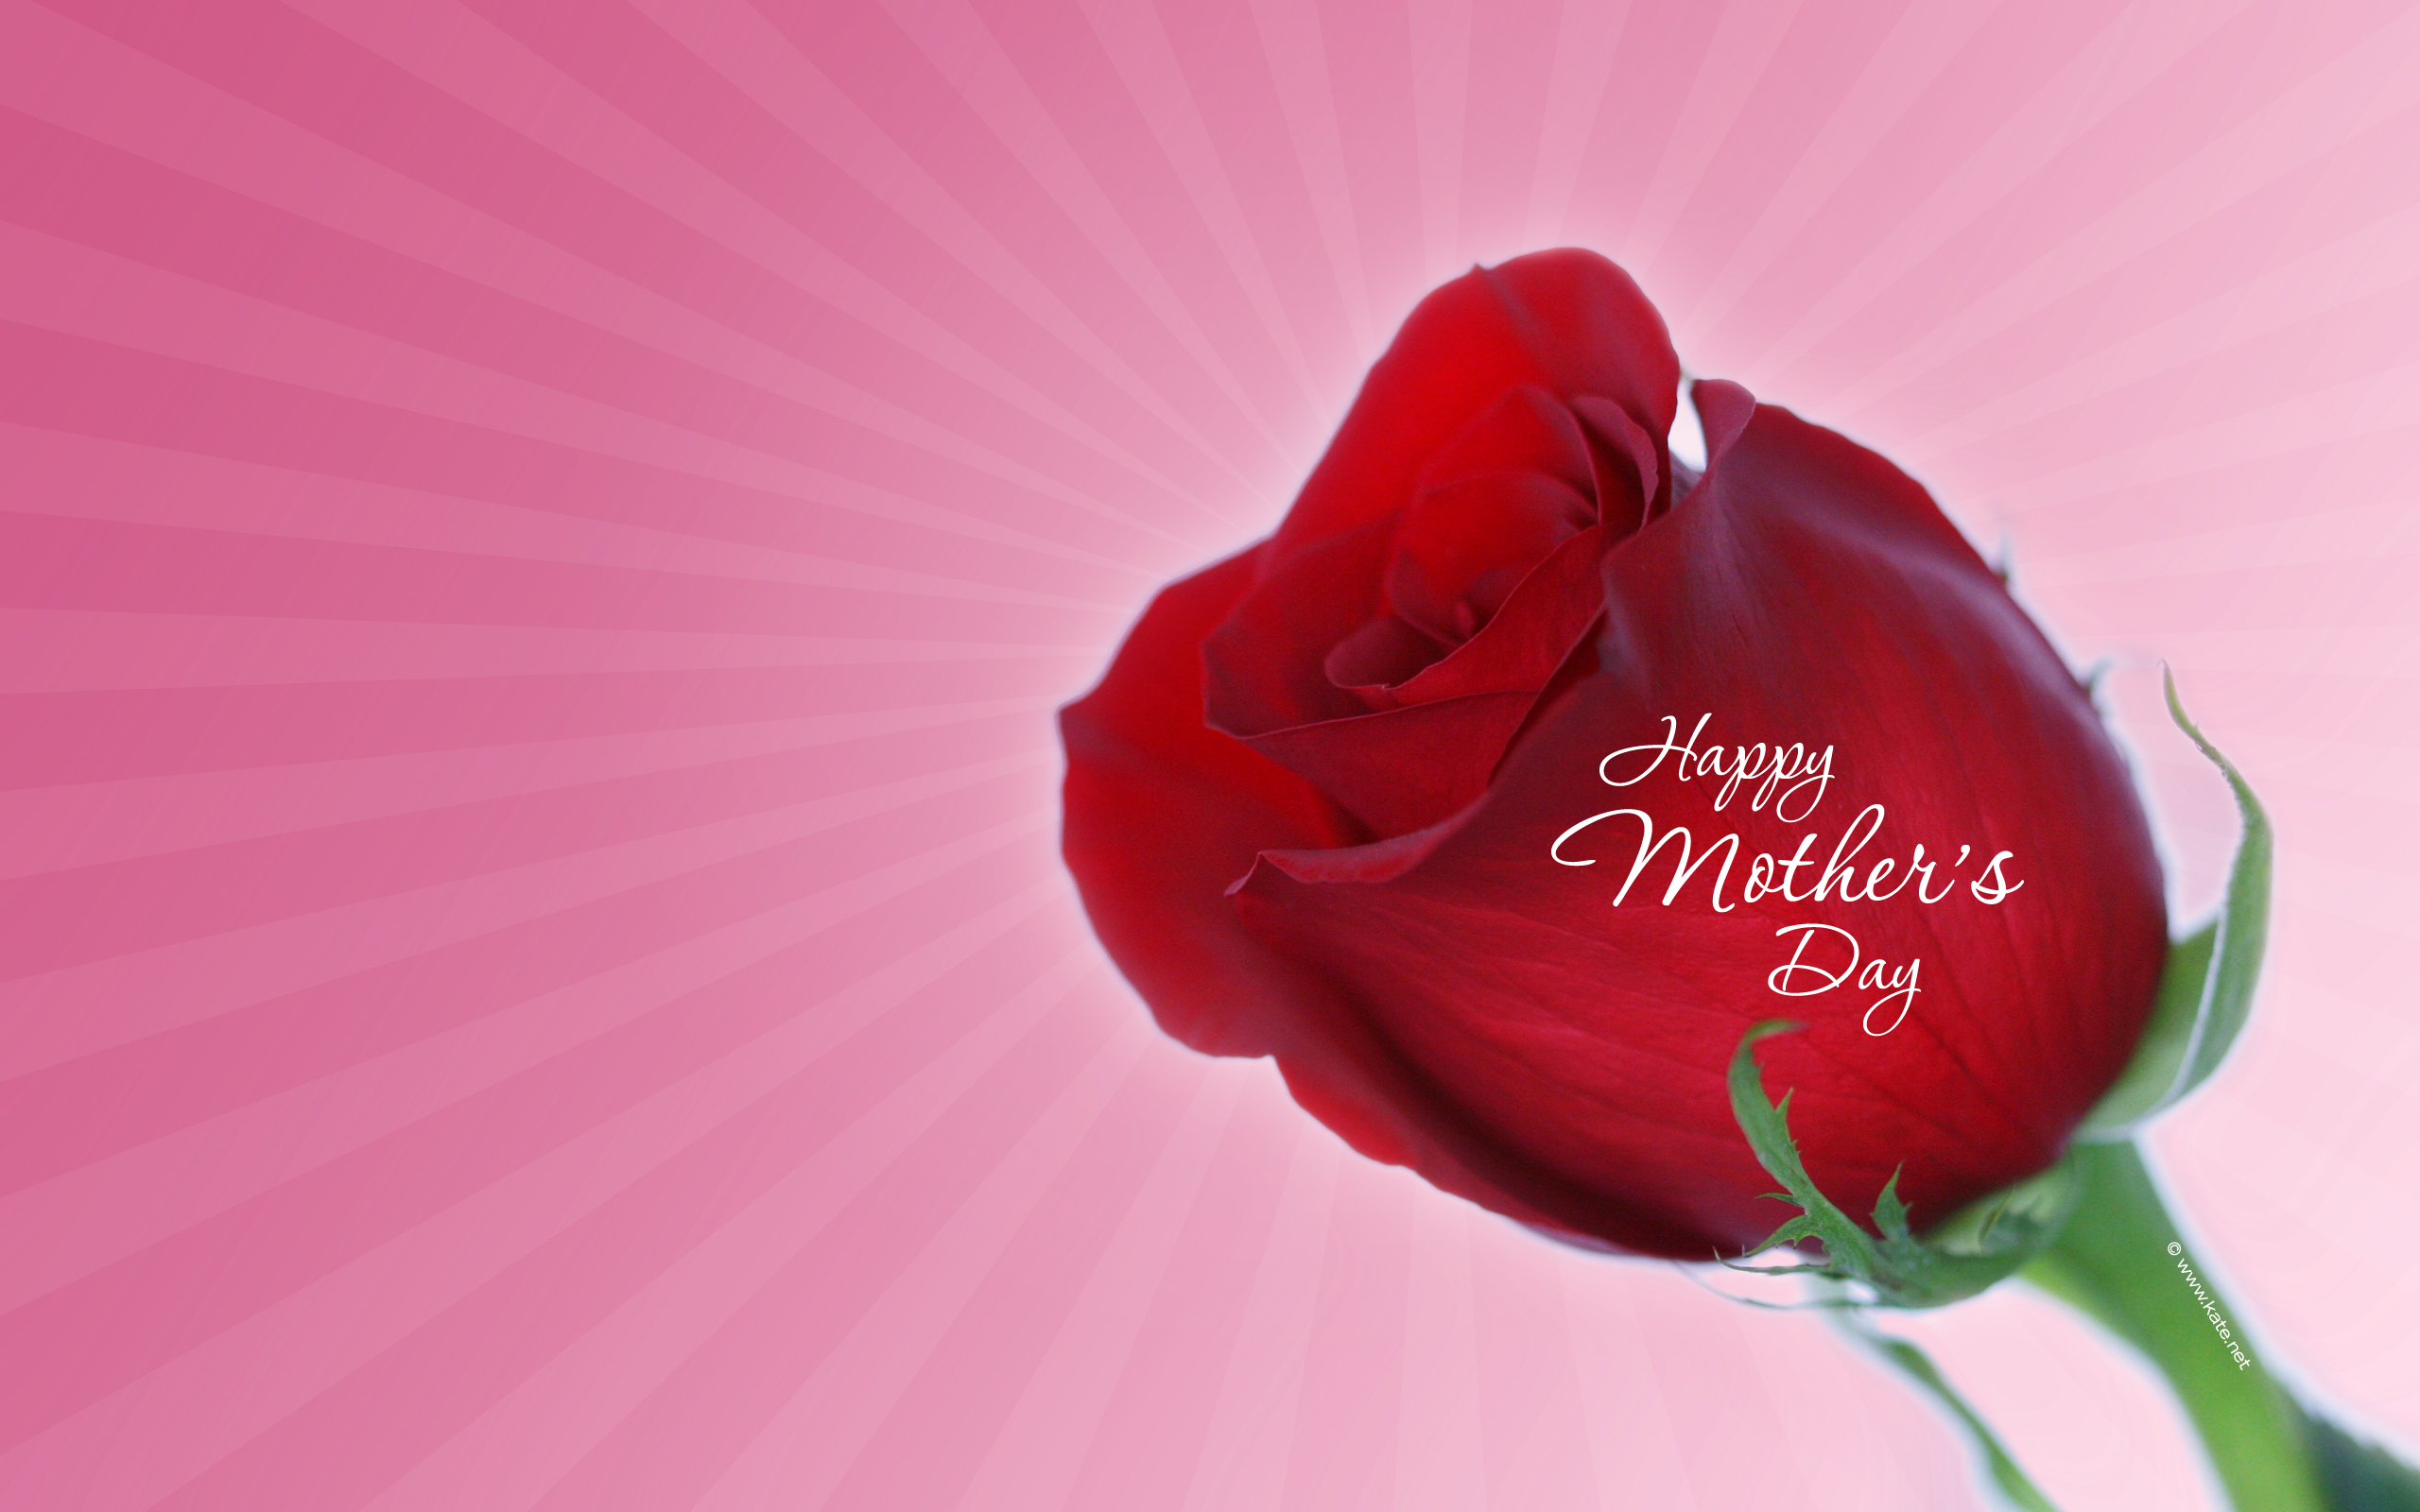 Mothers Day Background Wallpapers | Current Styles With Fashion Spot